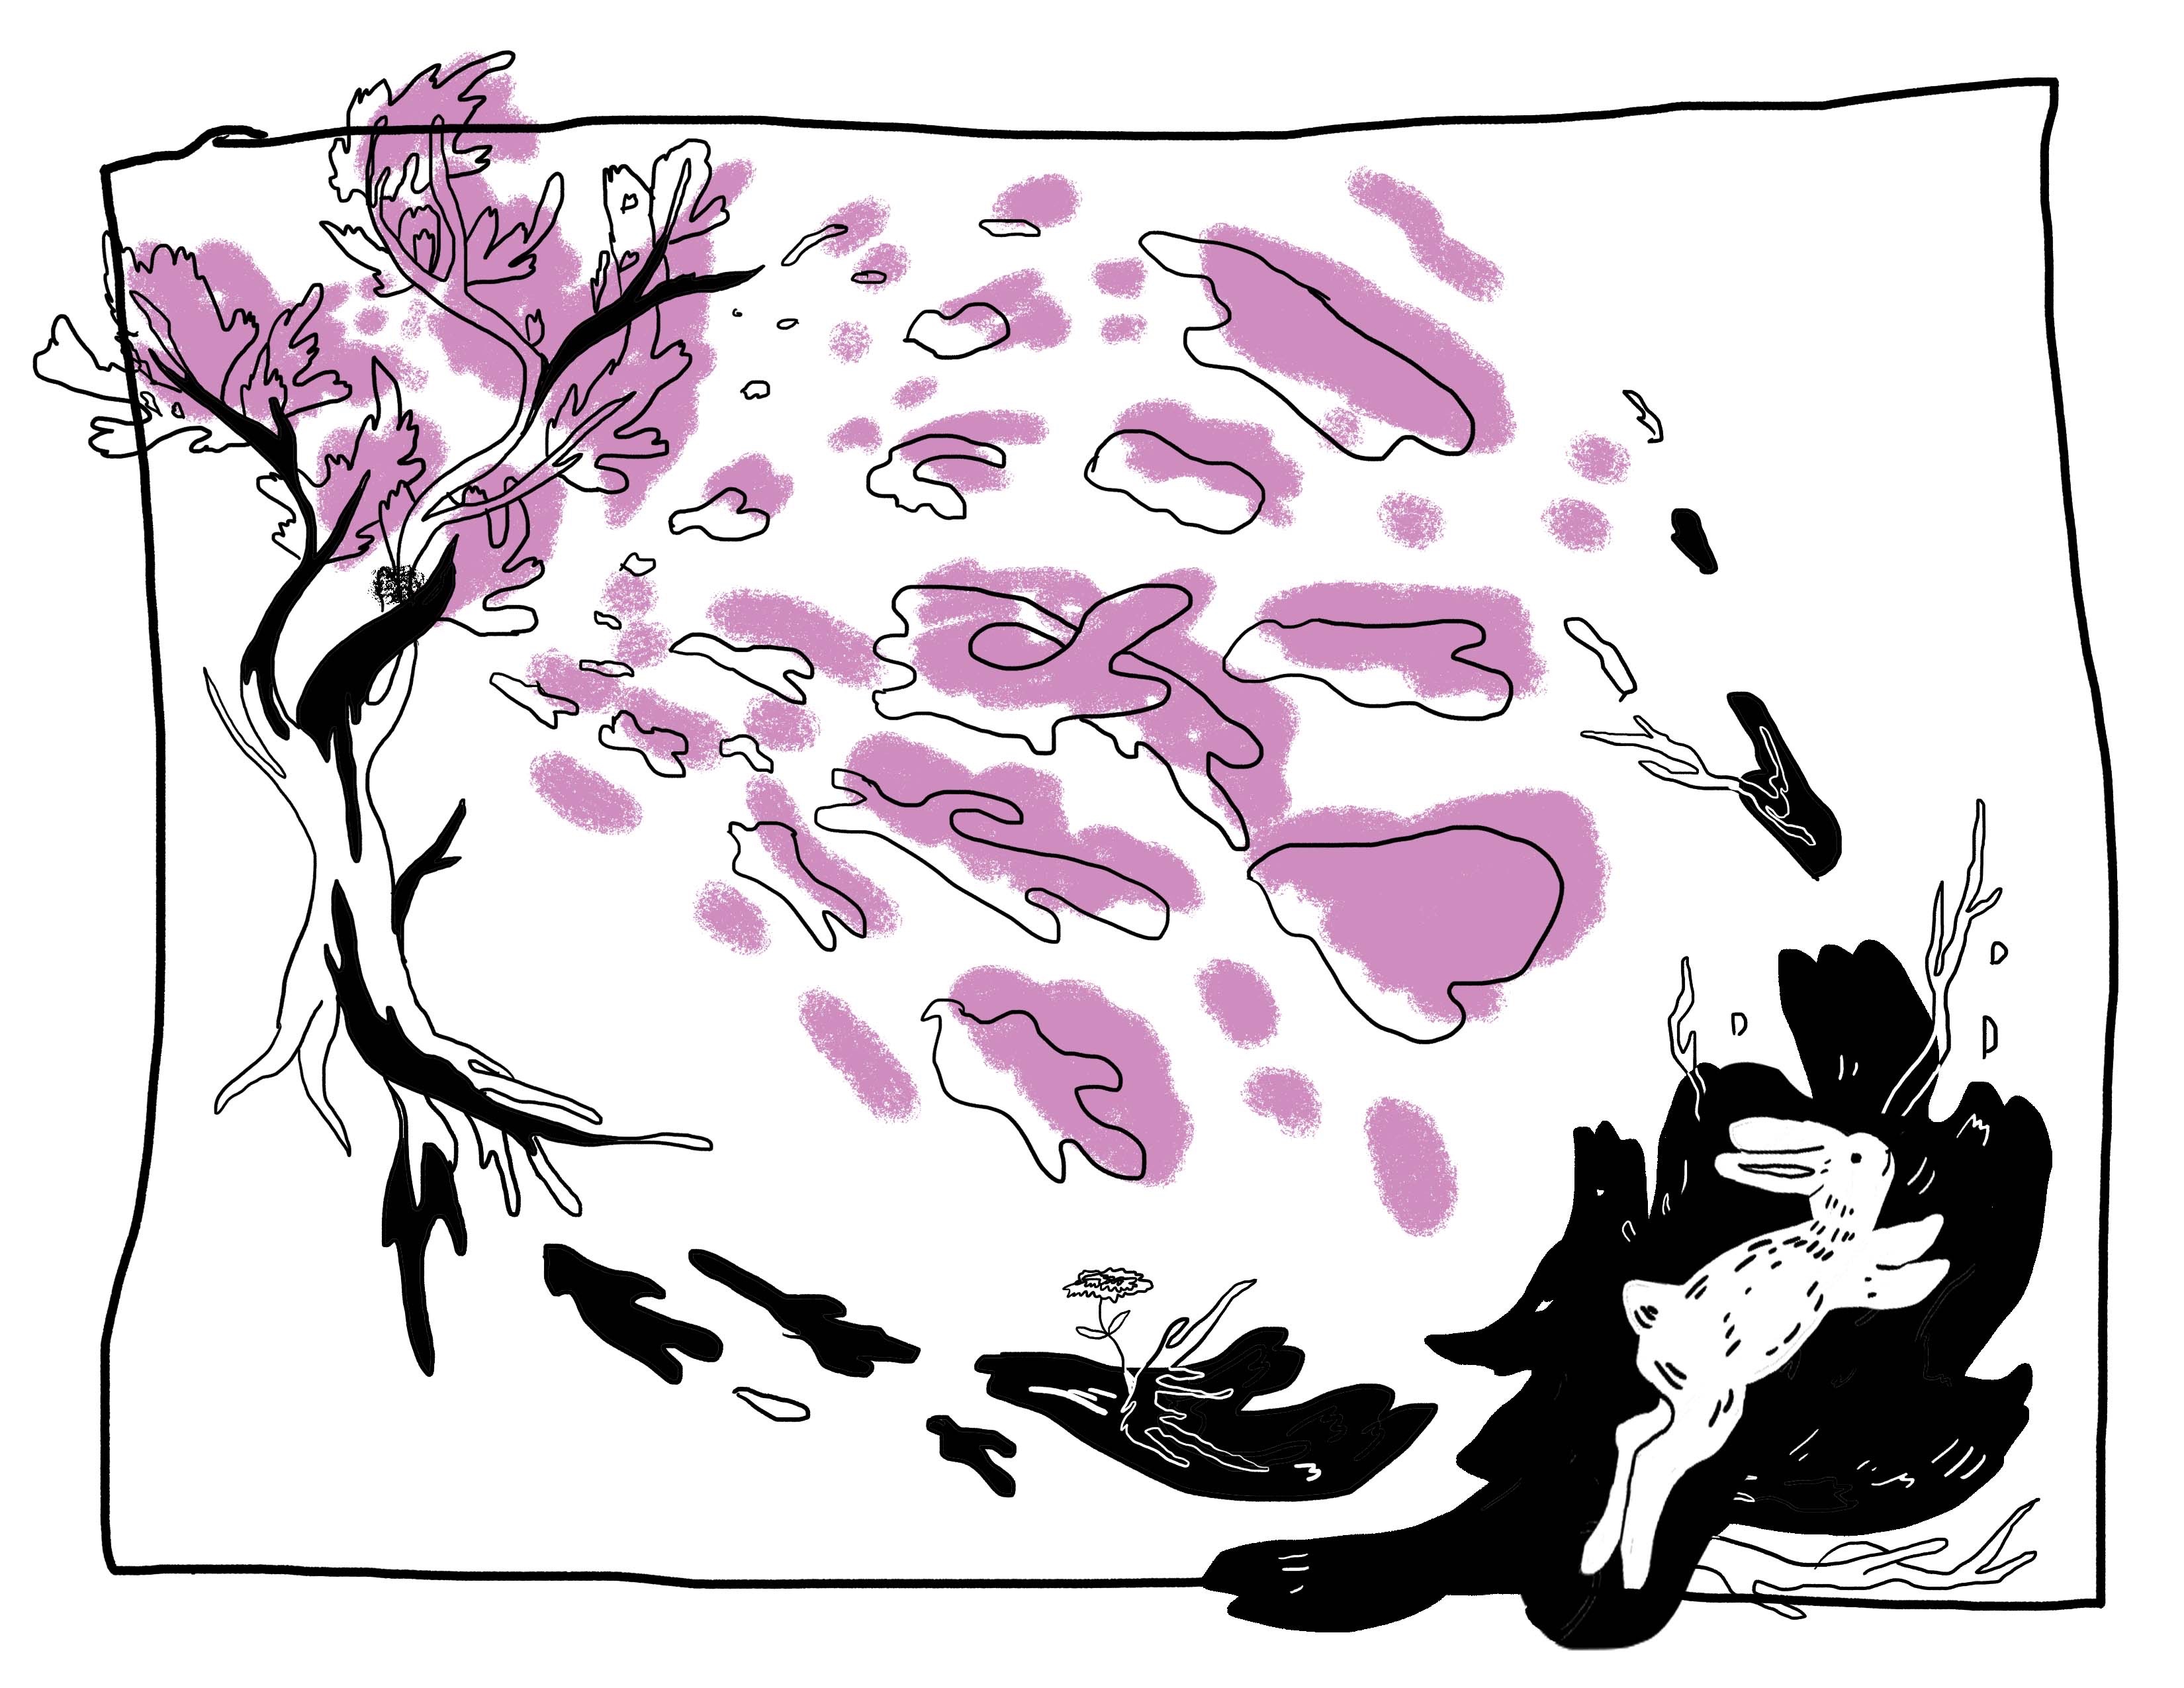 a comic featuring a drawing of a rabbit underneath a cherry tree that's dropping blossoms